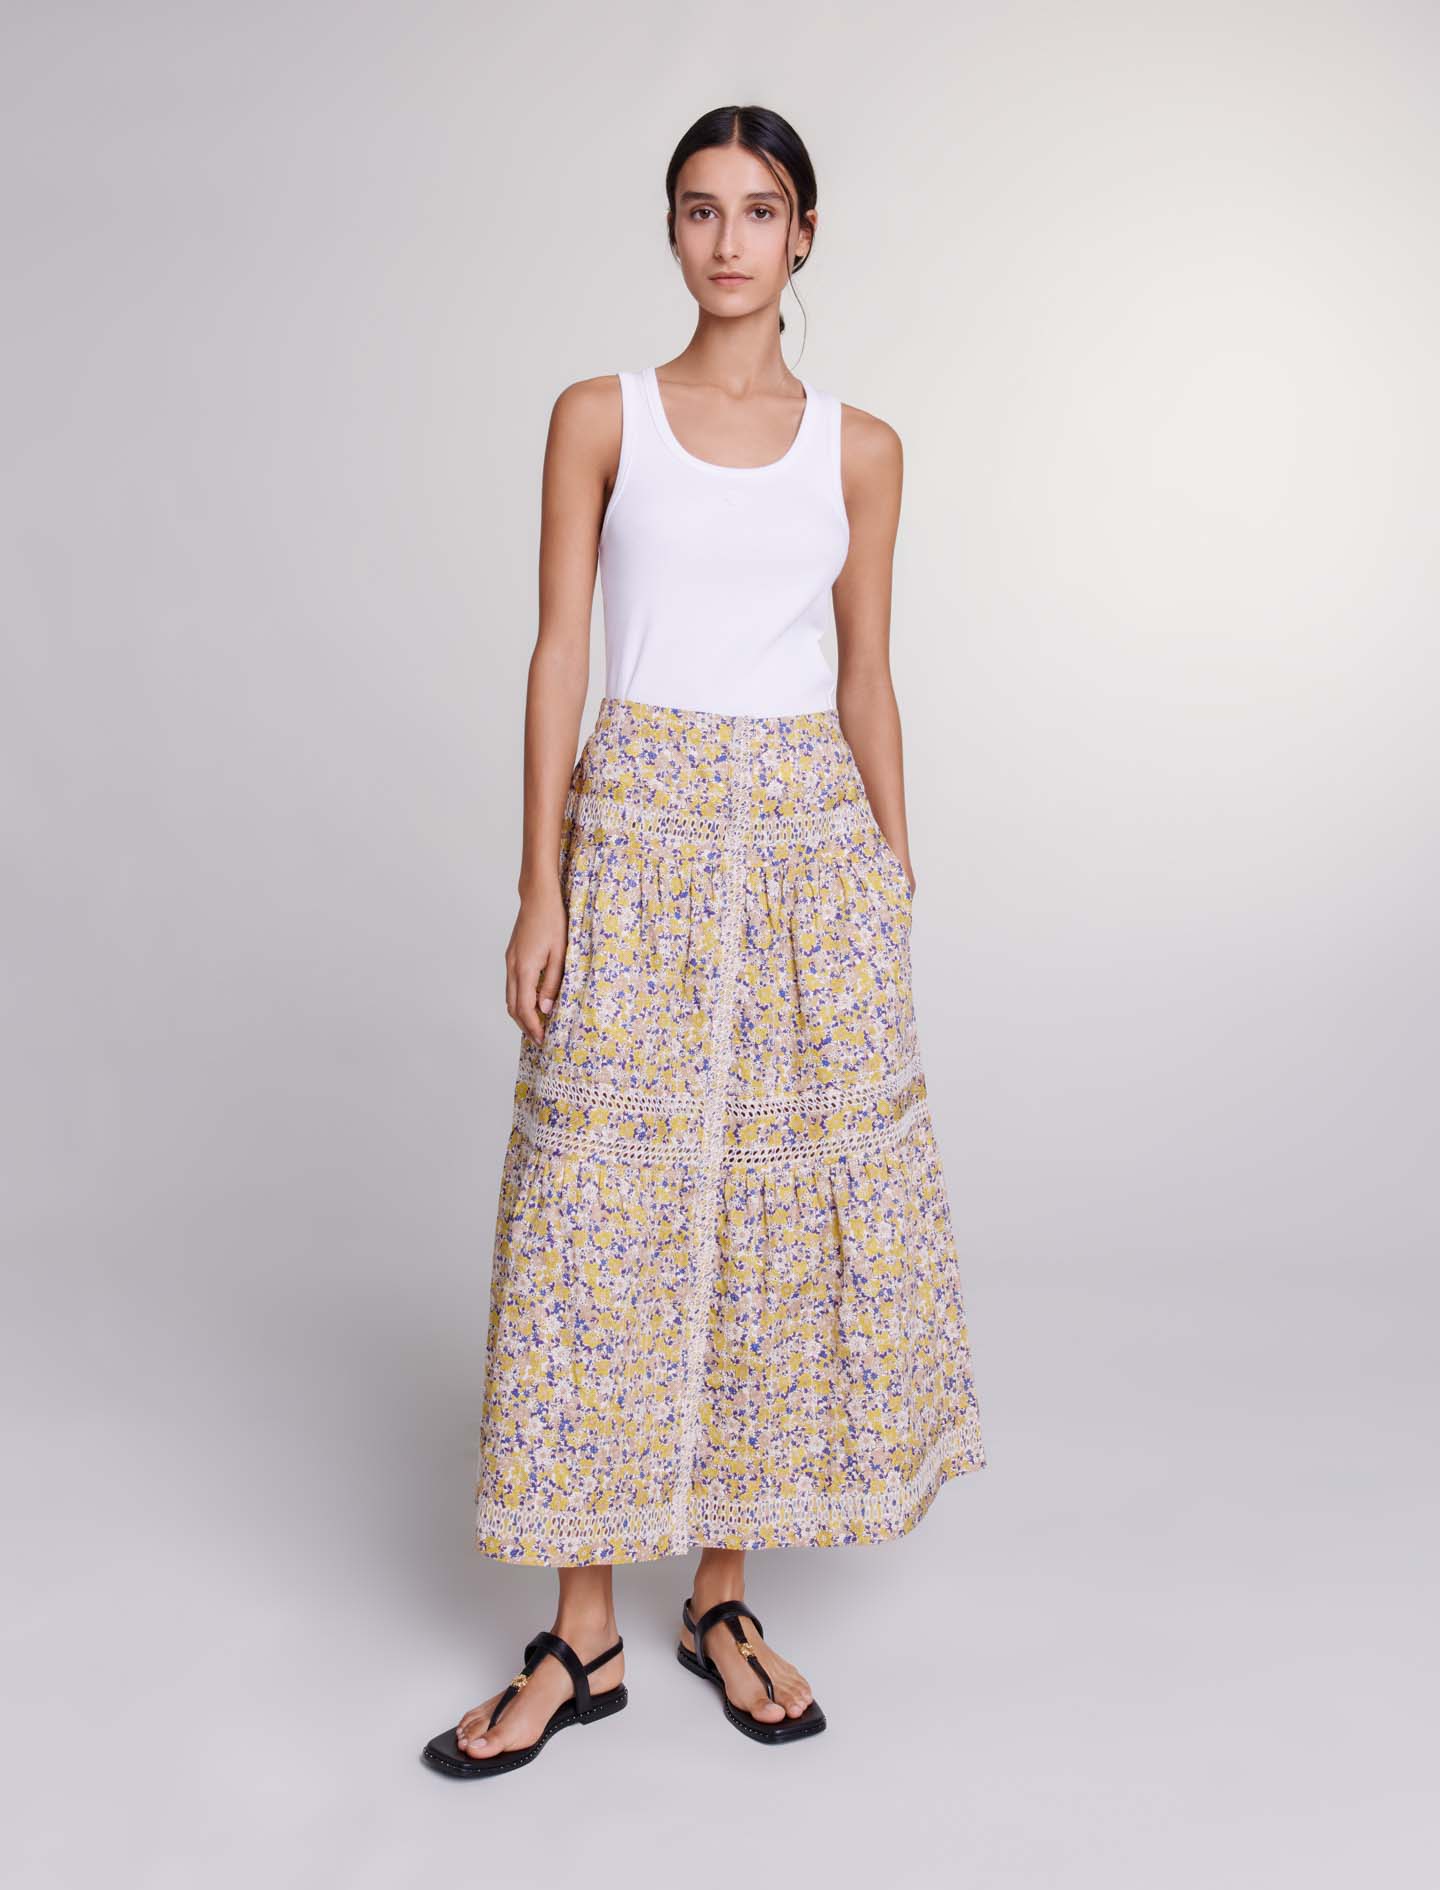 Mixte's cotton Embroidery: Long floral embroidered skirt, size Mixte-Skirts & Shorts-US XL / FR 41, in color Embroided Flowers Beige Print /